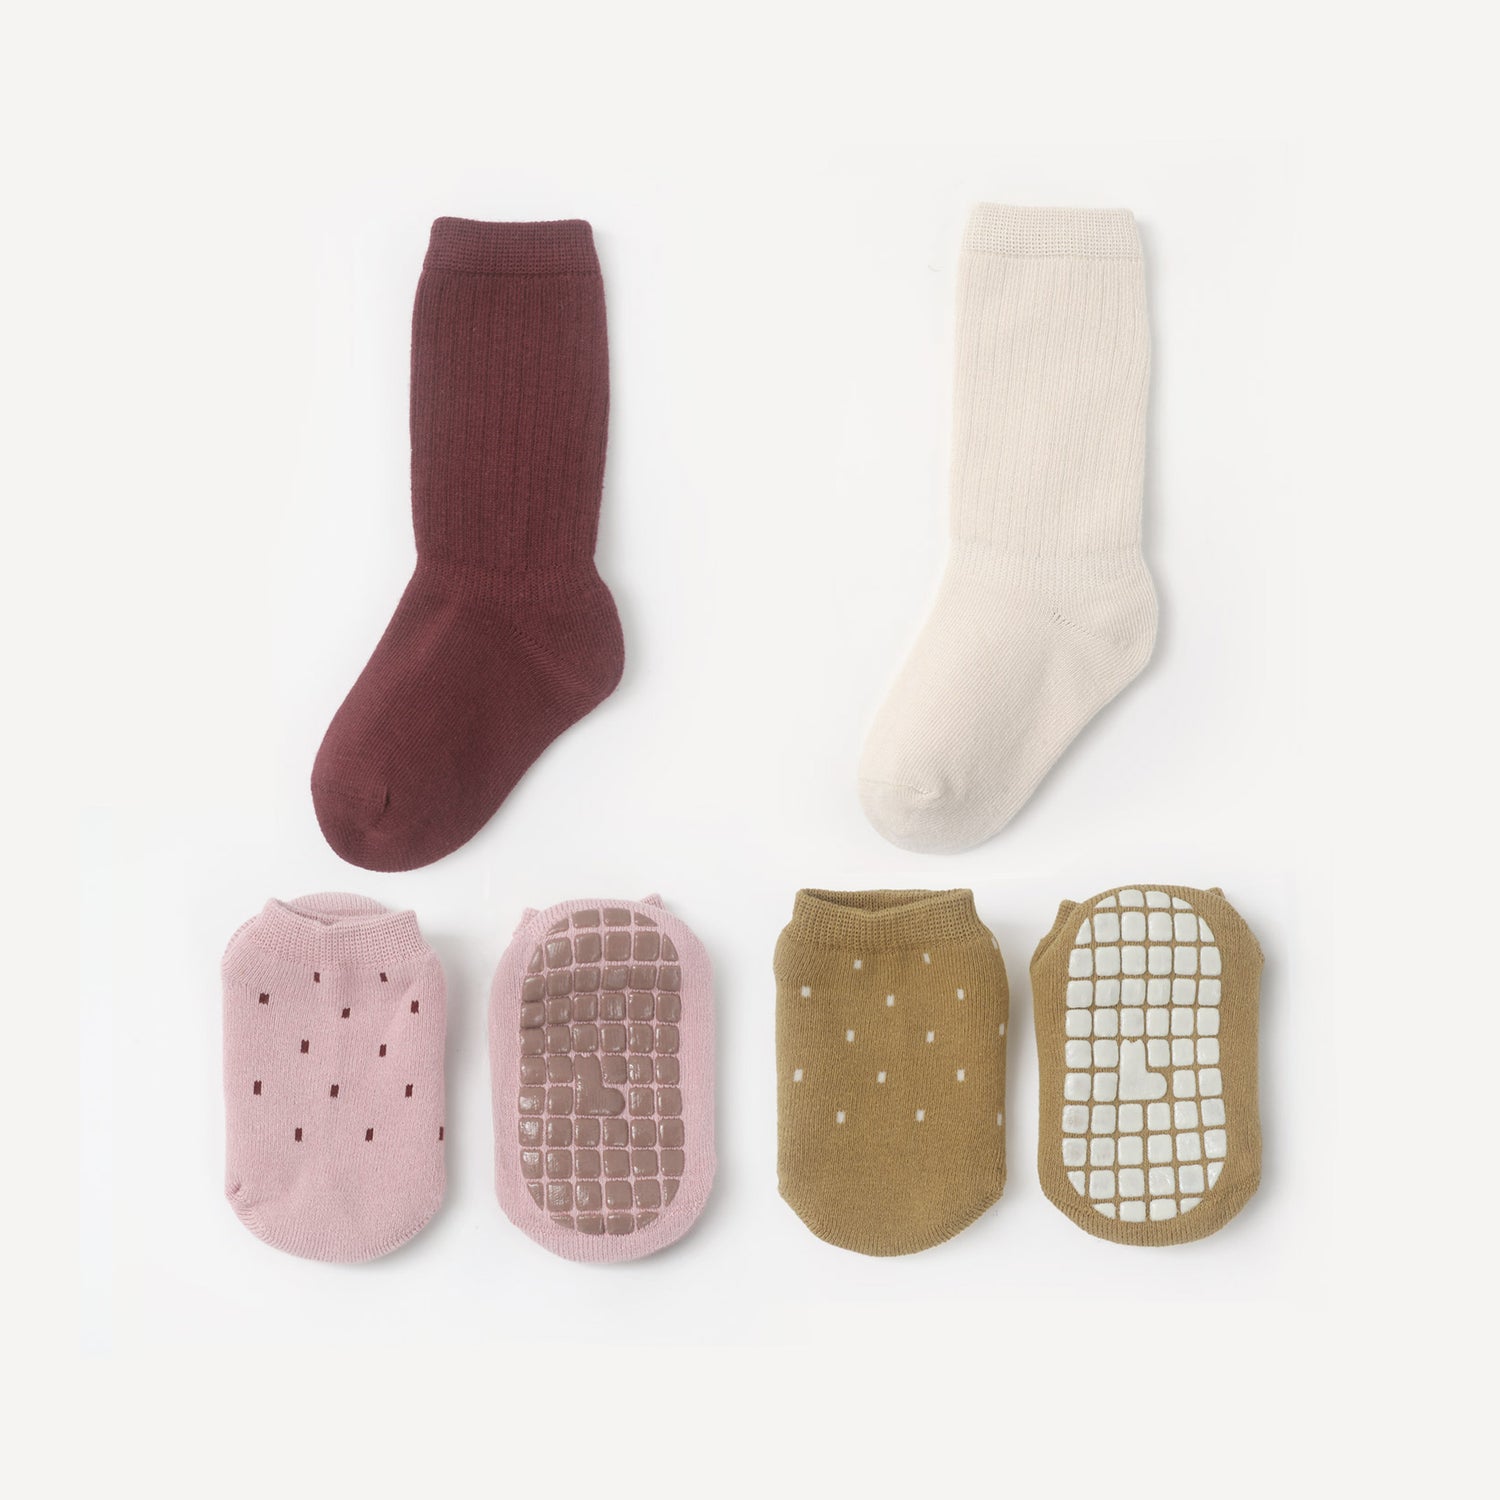 Unisex cotton baby socks with stay-on technology